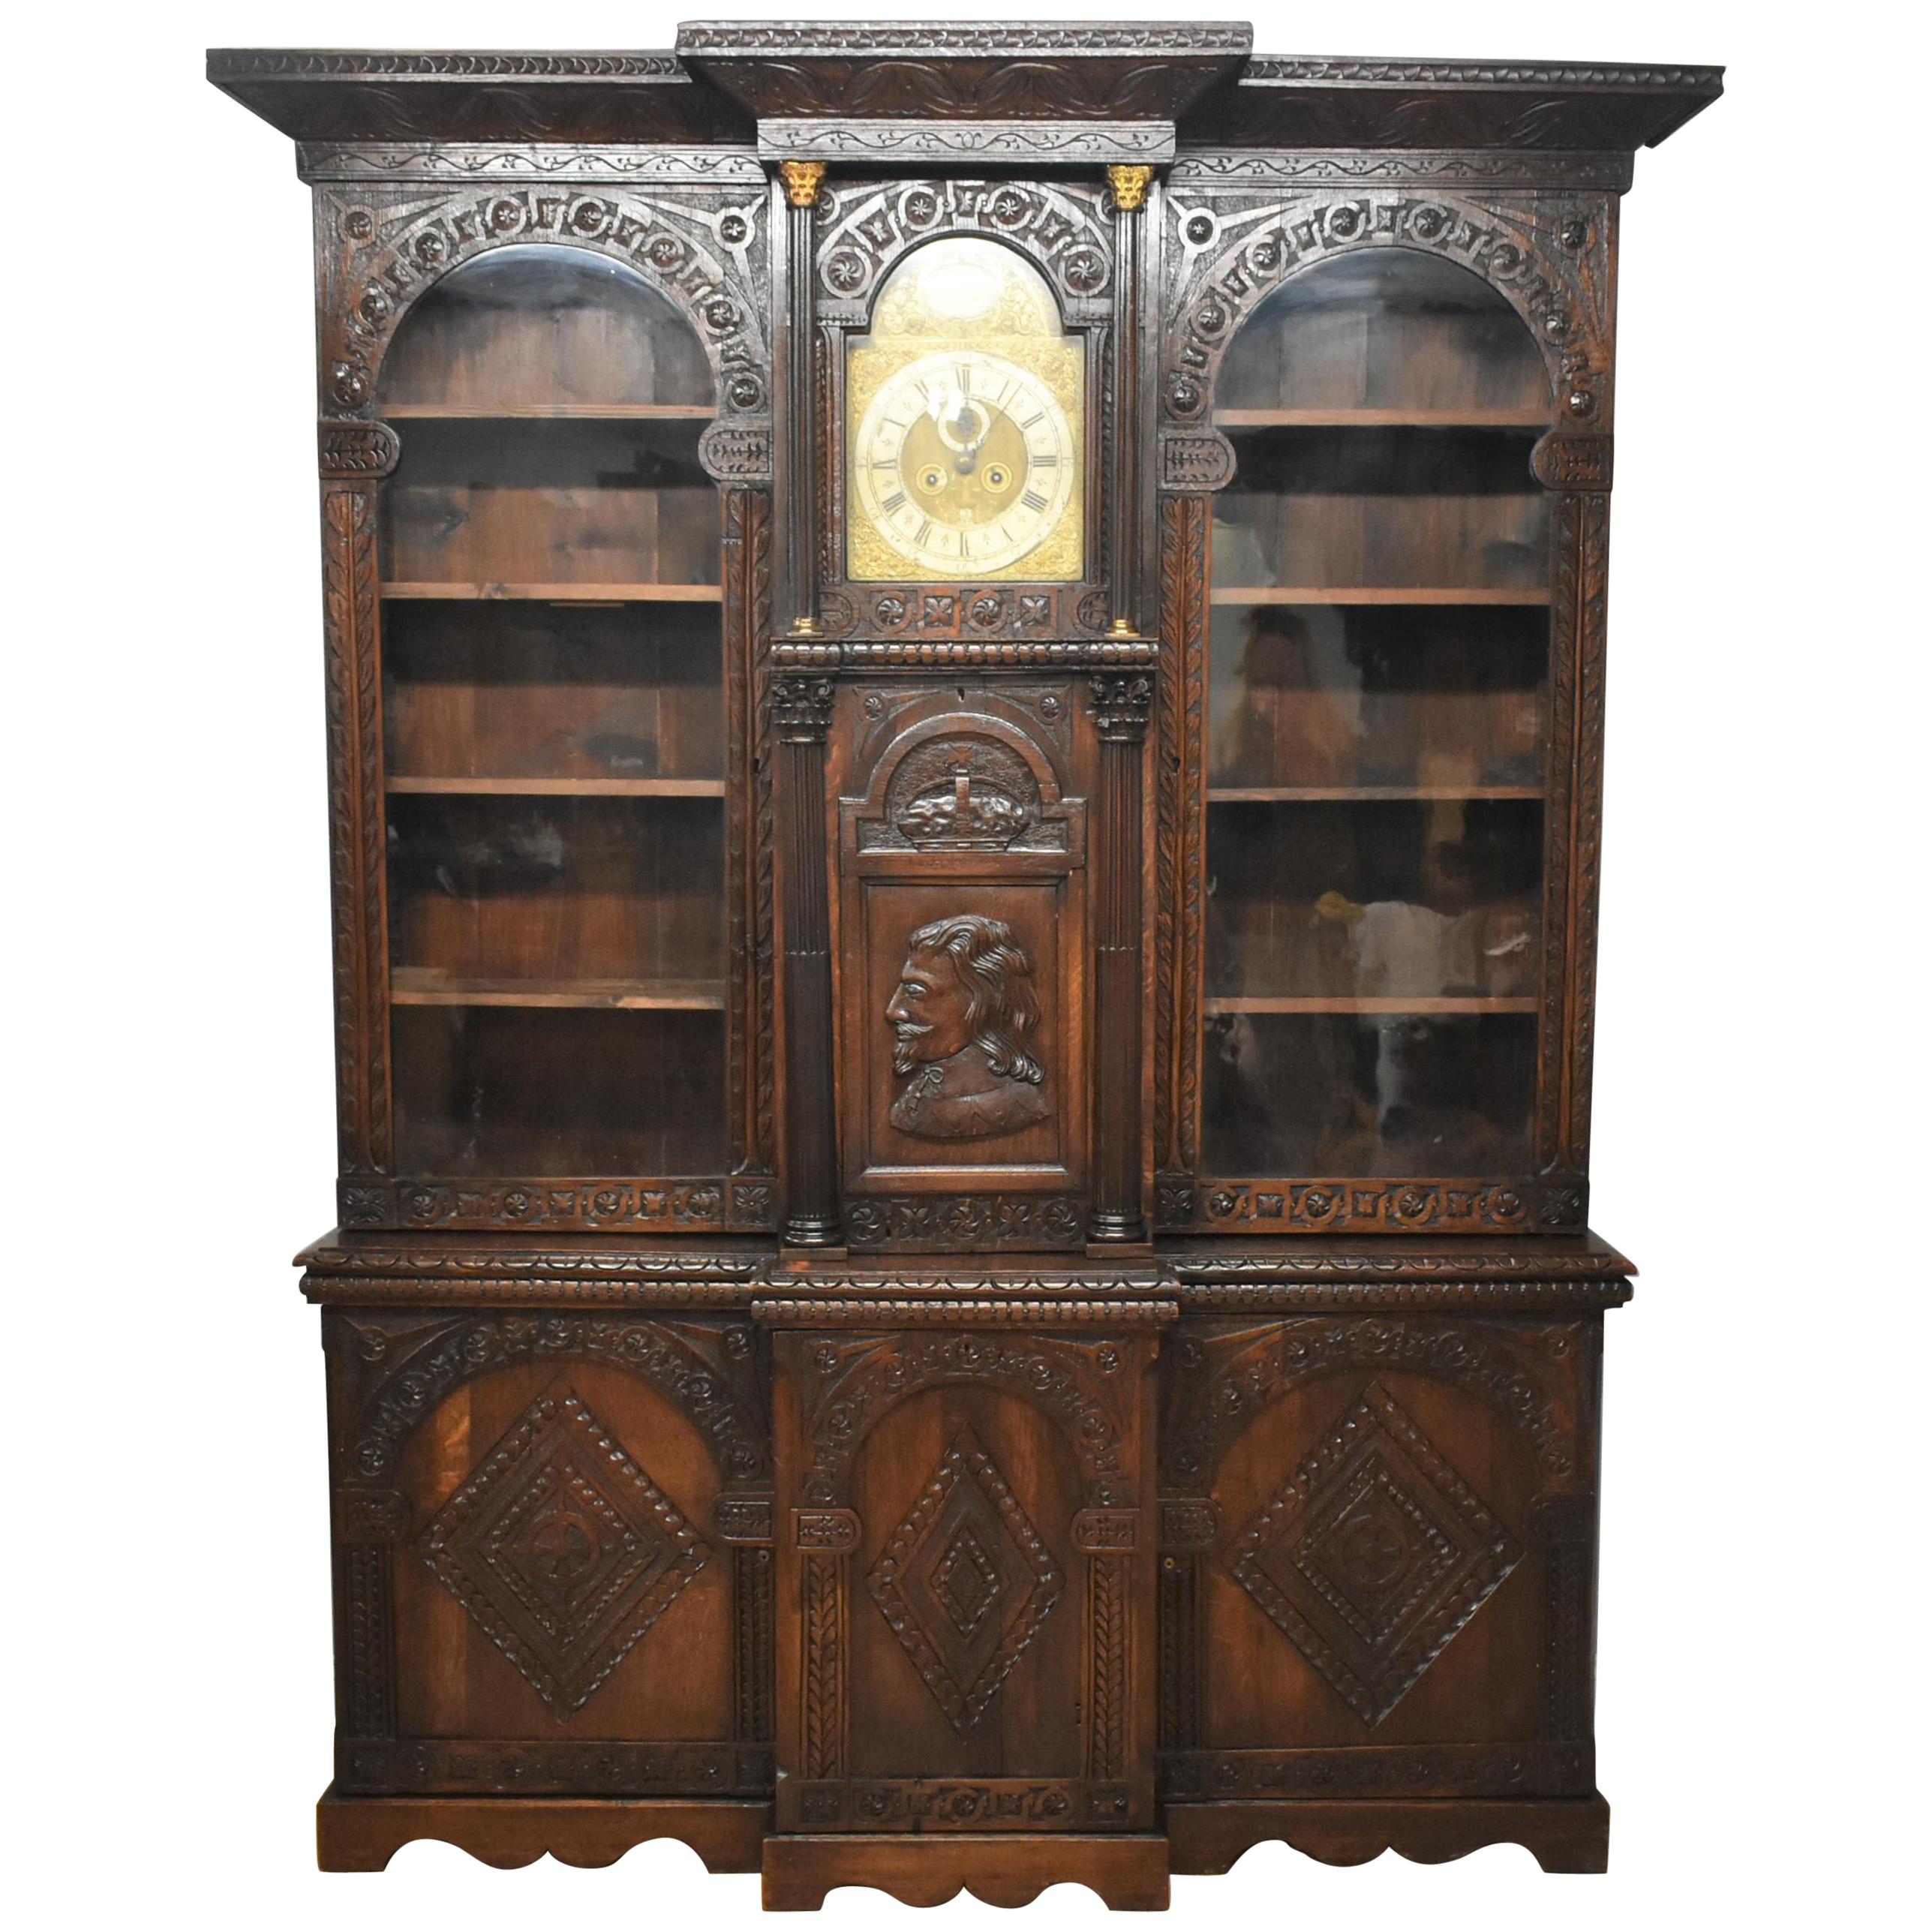 Victorian Carved Oak Cabinet or Bookcase with Phil Walton Devizes Clock